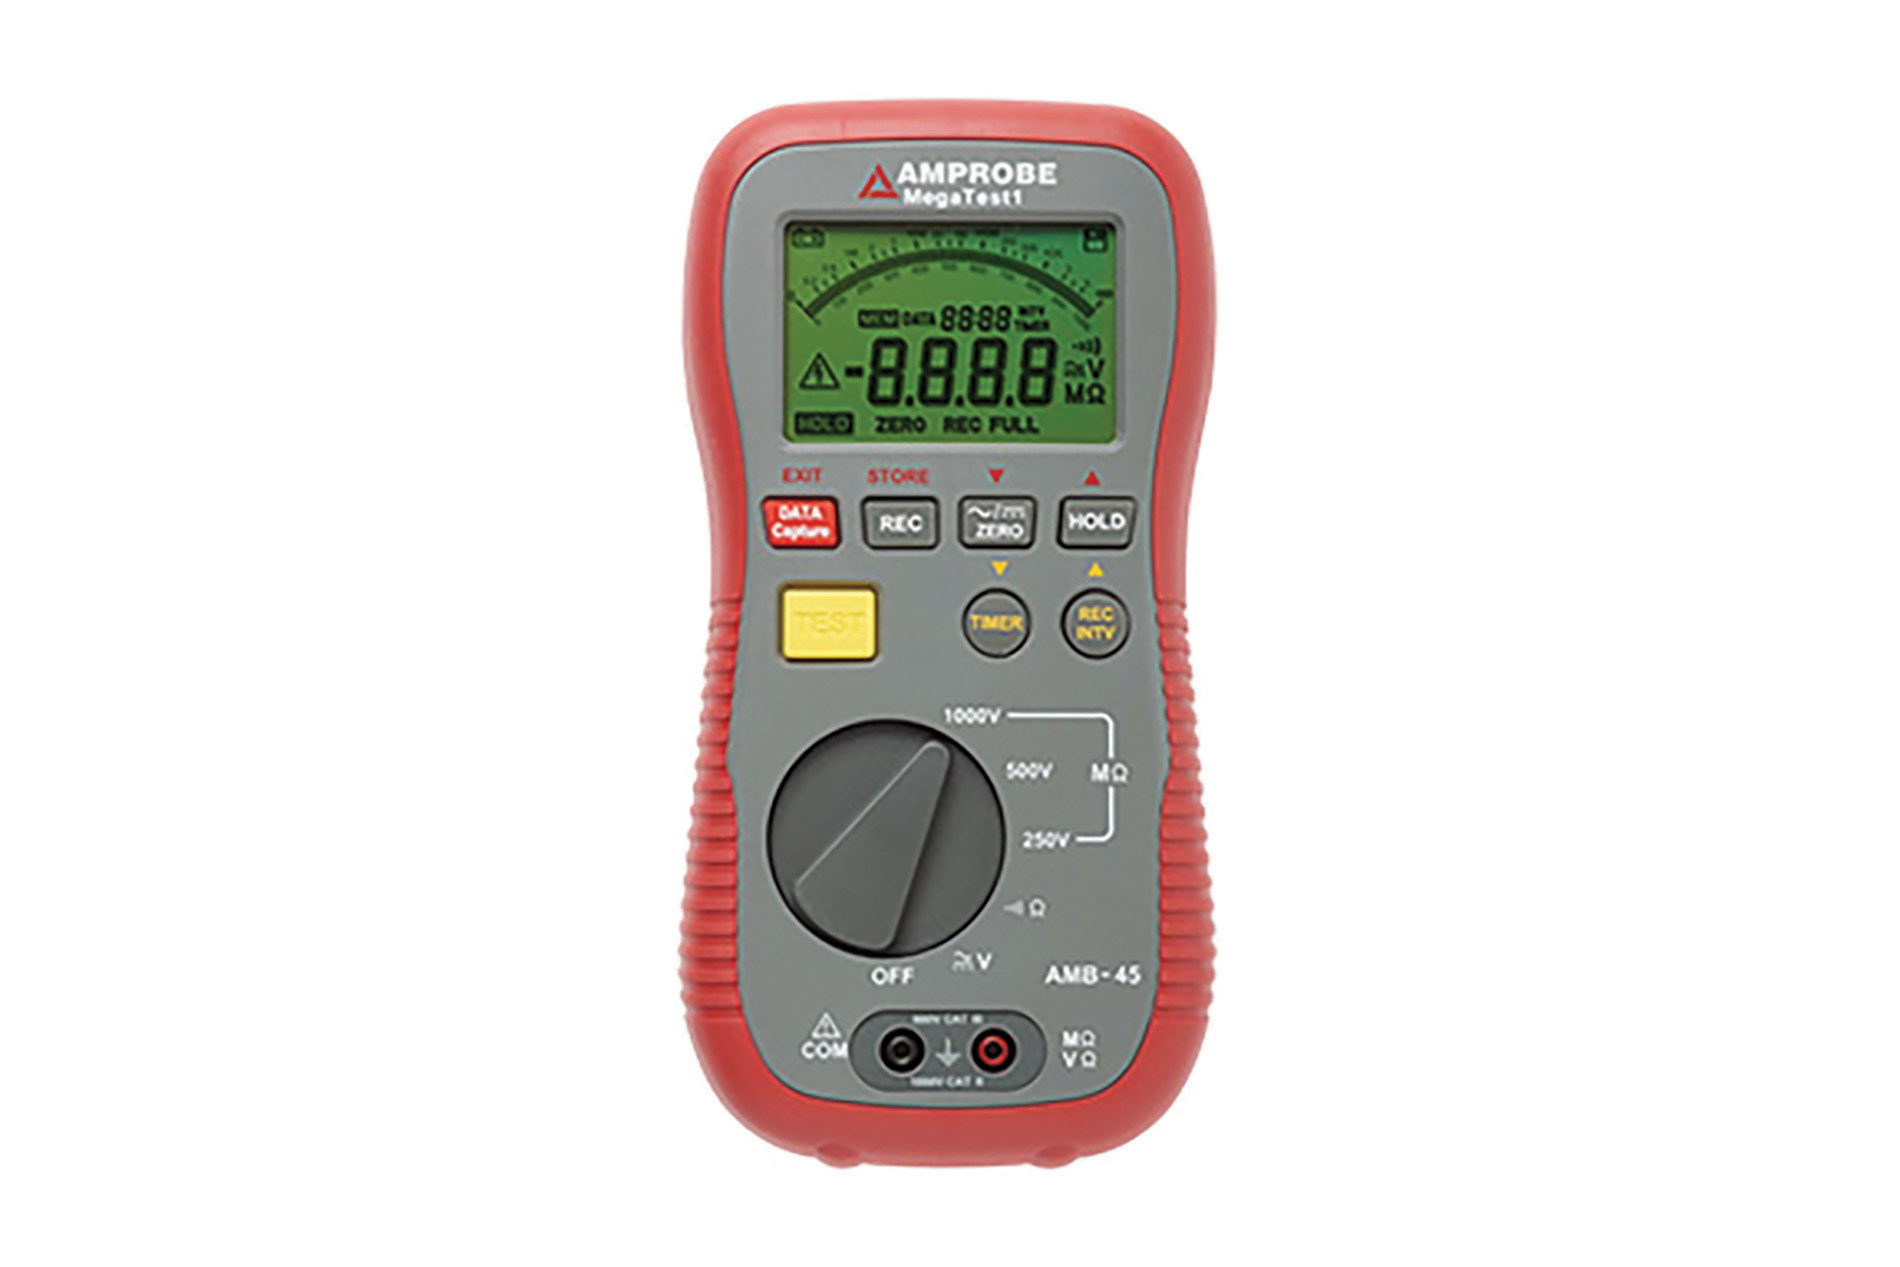 Red and gray insulation resistance tester. Image by Amprobe.